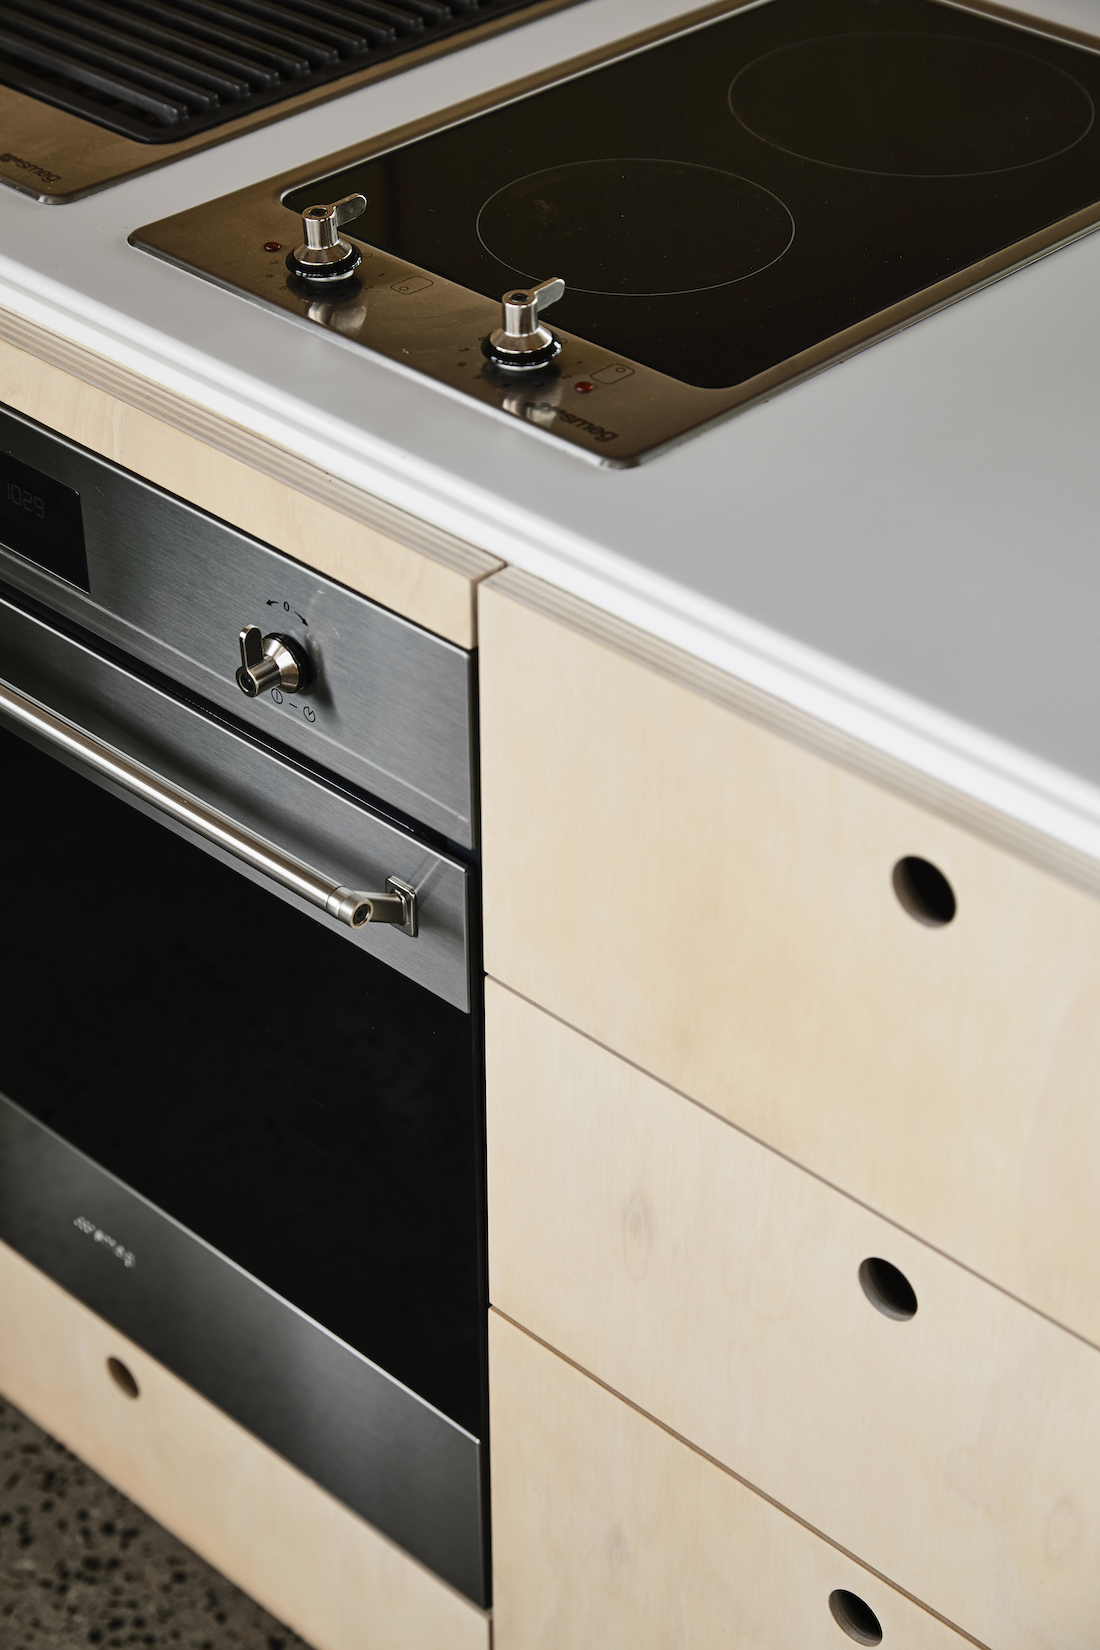 Oven and timber drawers with pull holes in kitchen